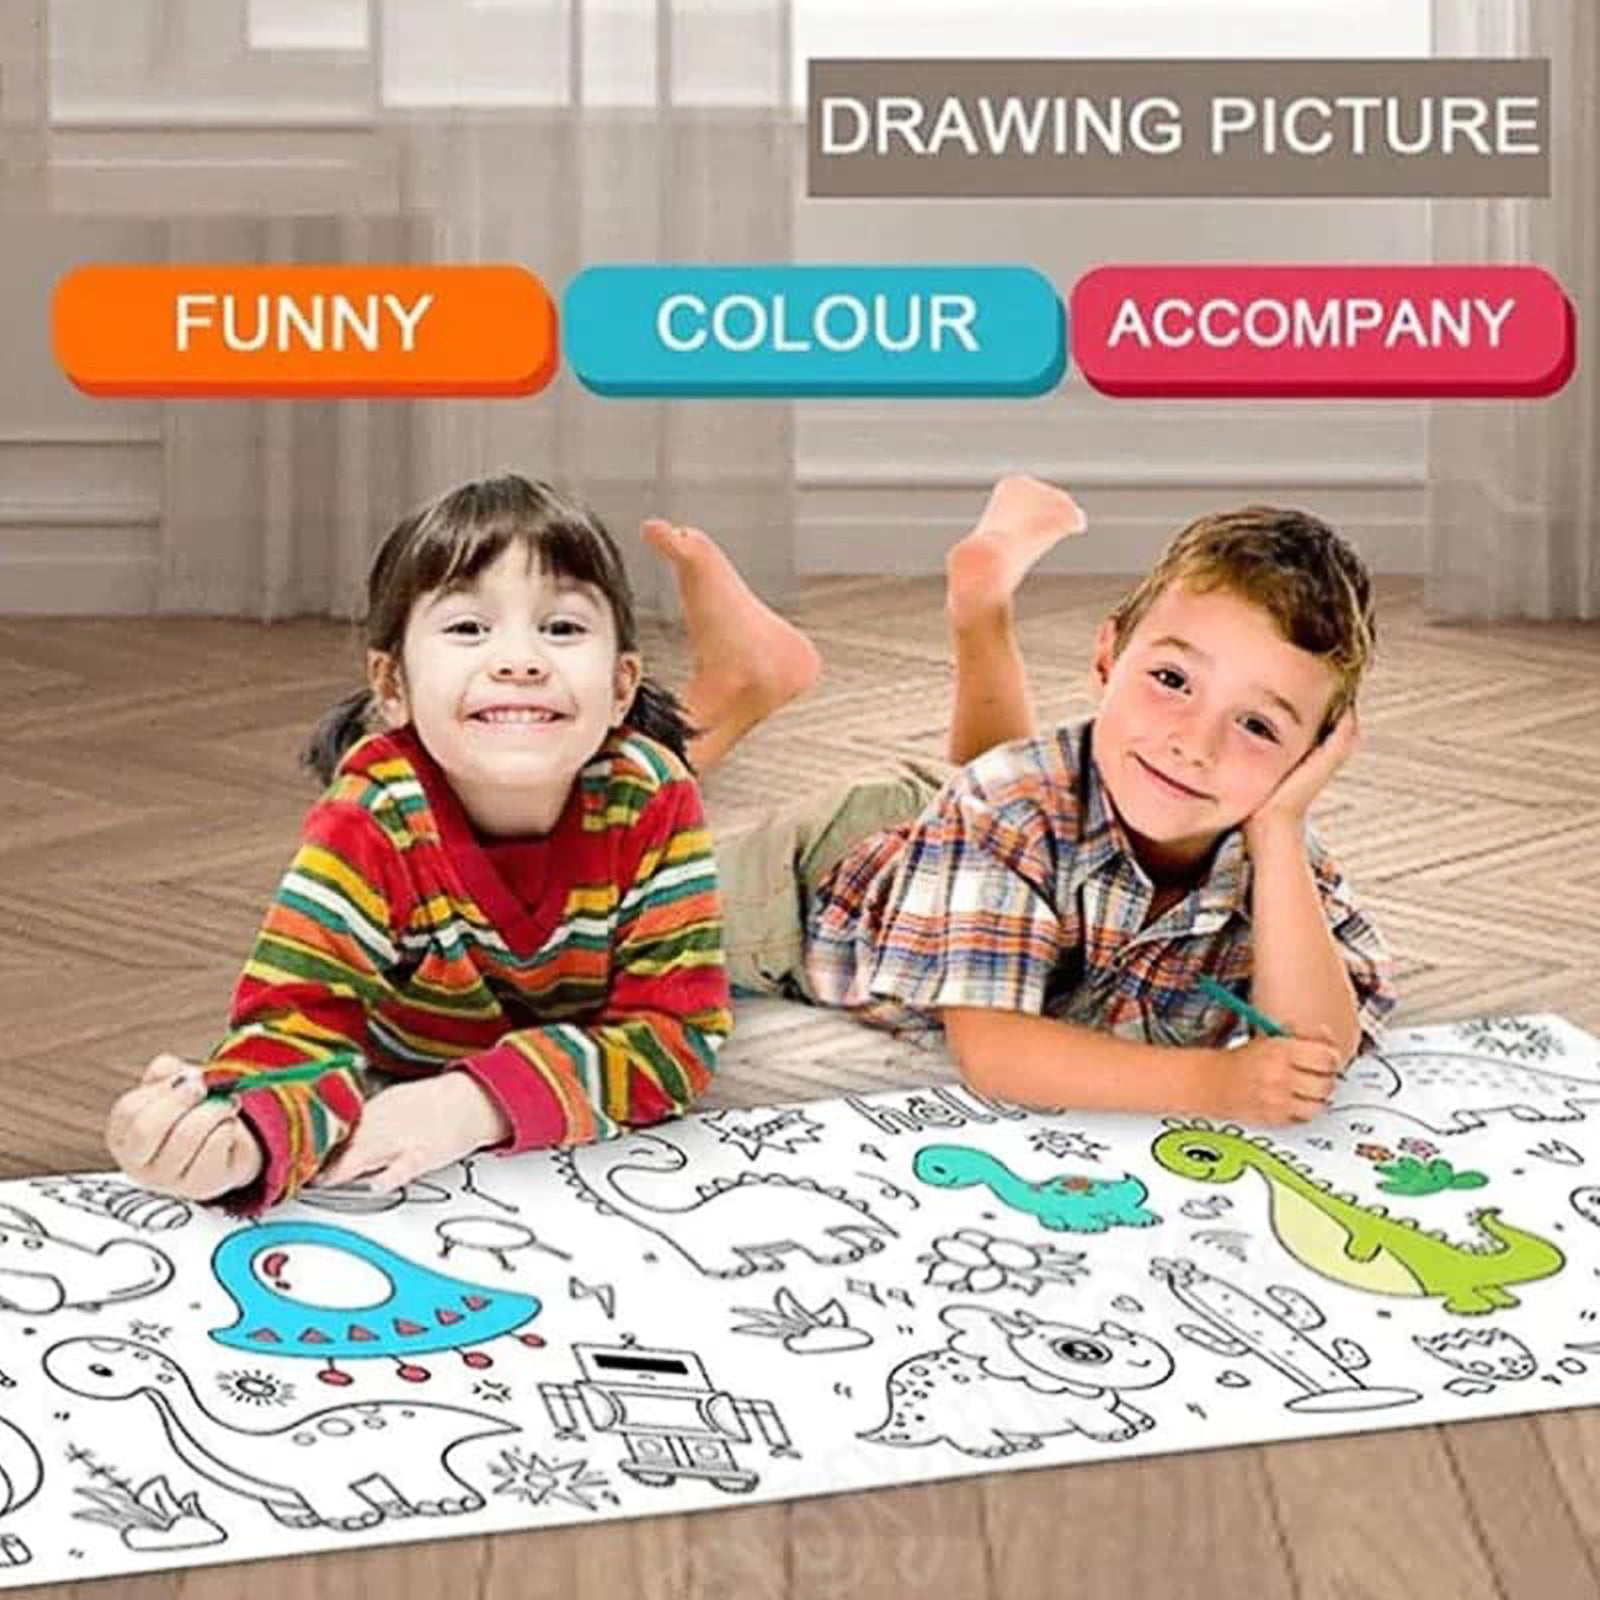 Children's Drawing Roll - Coloring Paper Roll for Kids, Drawing Paper Roll DIY Painting Drawing Color Filling Paper, 11.8 Inches, Size: 30, Green